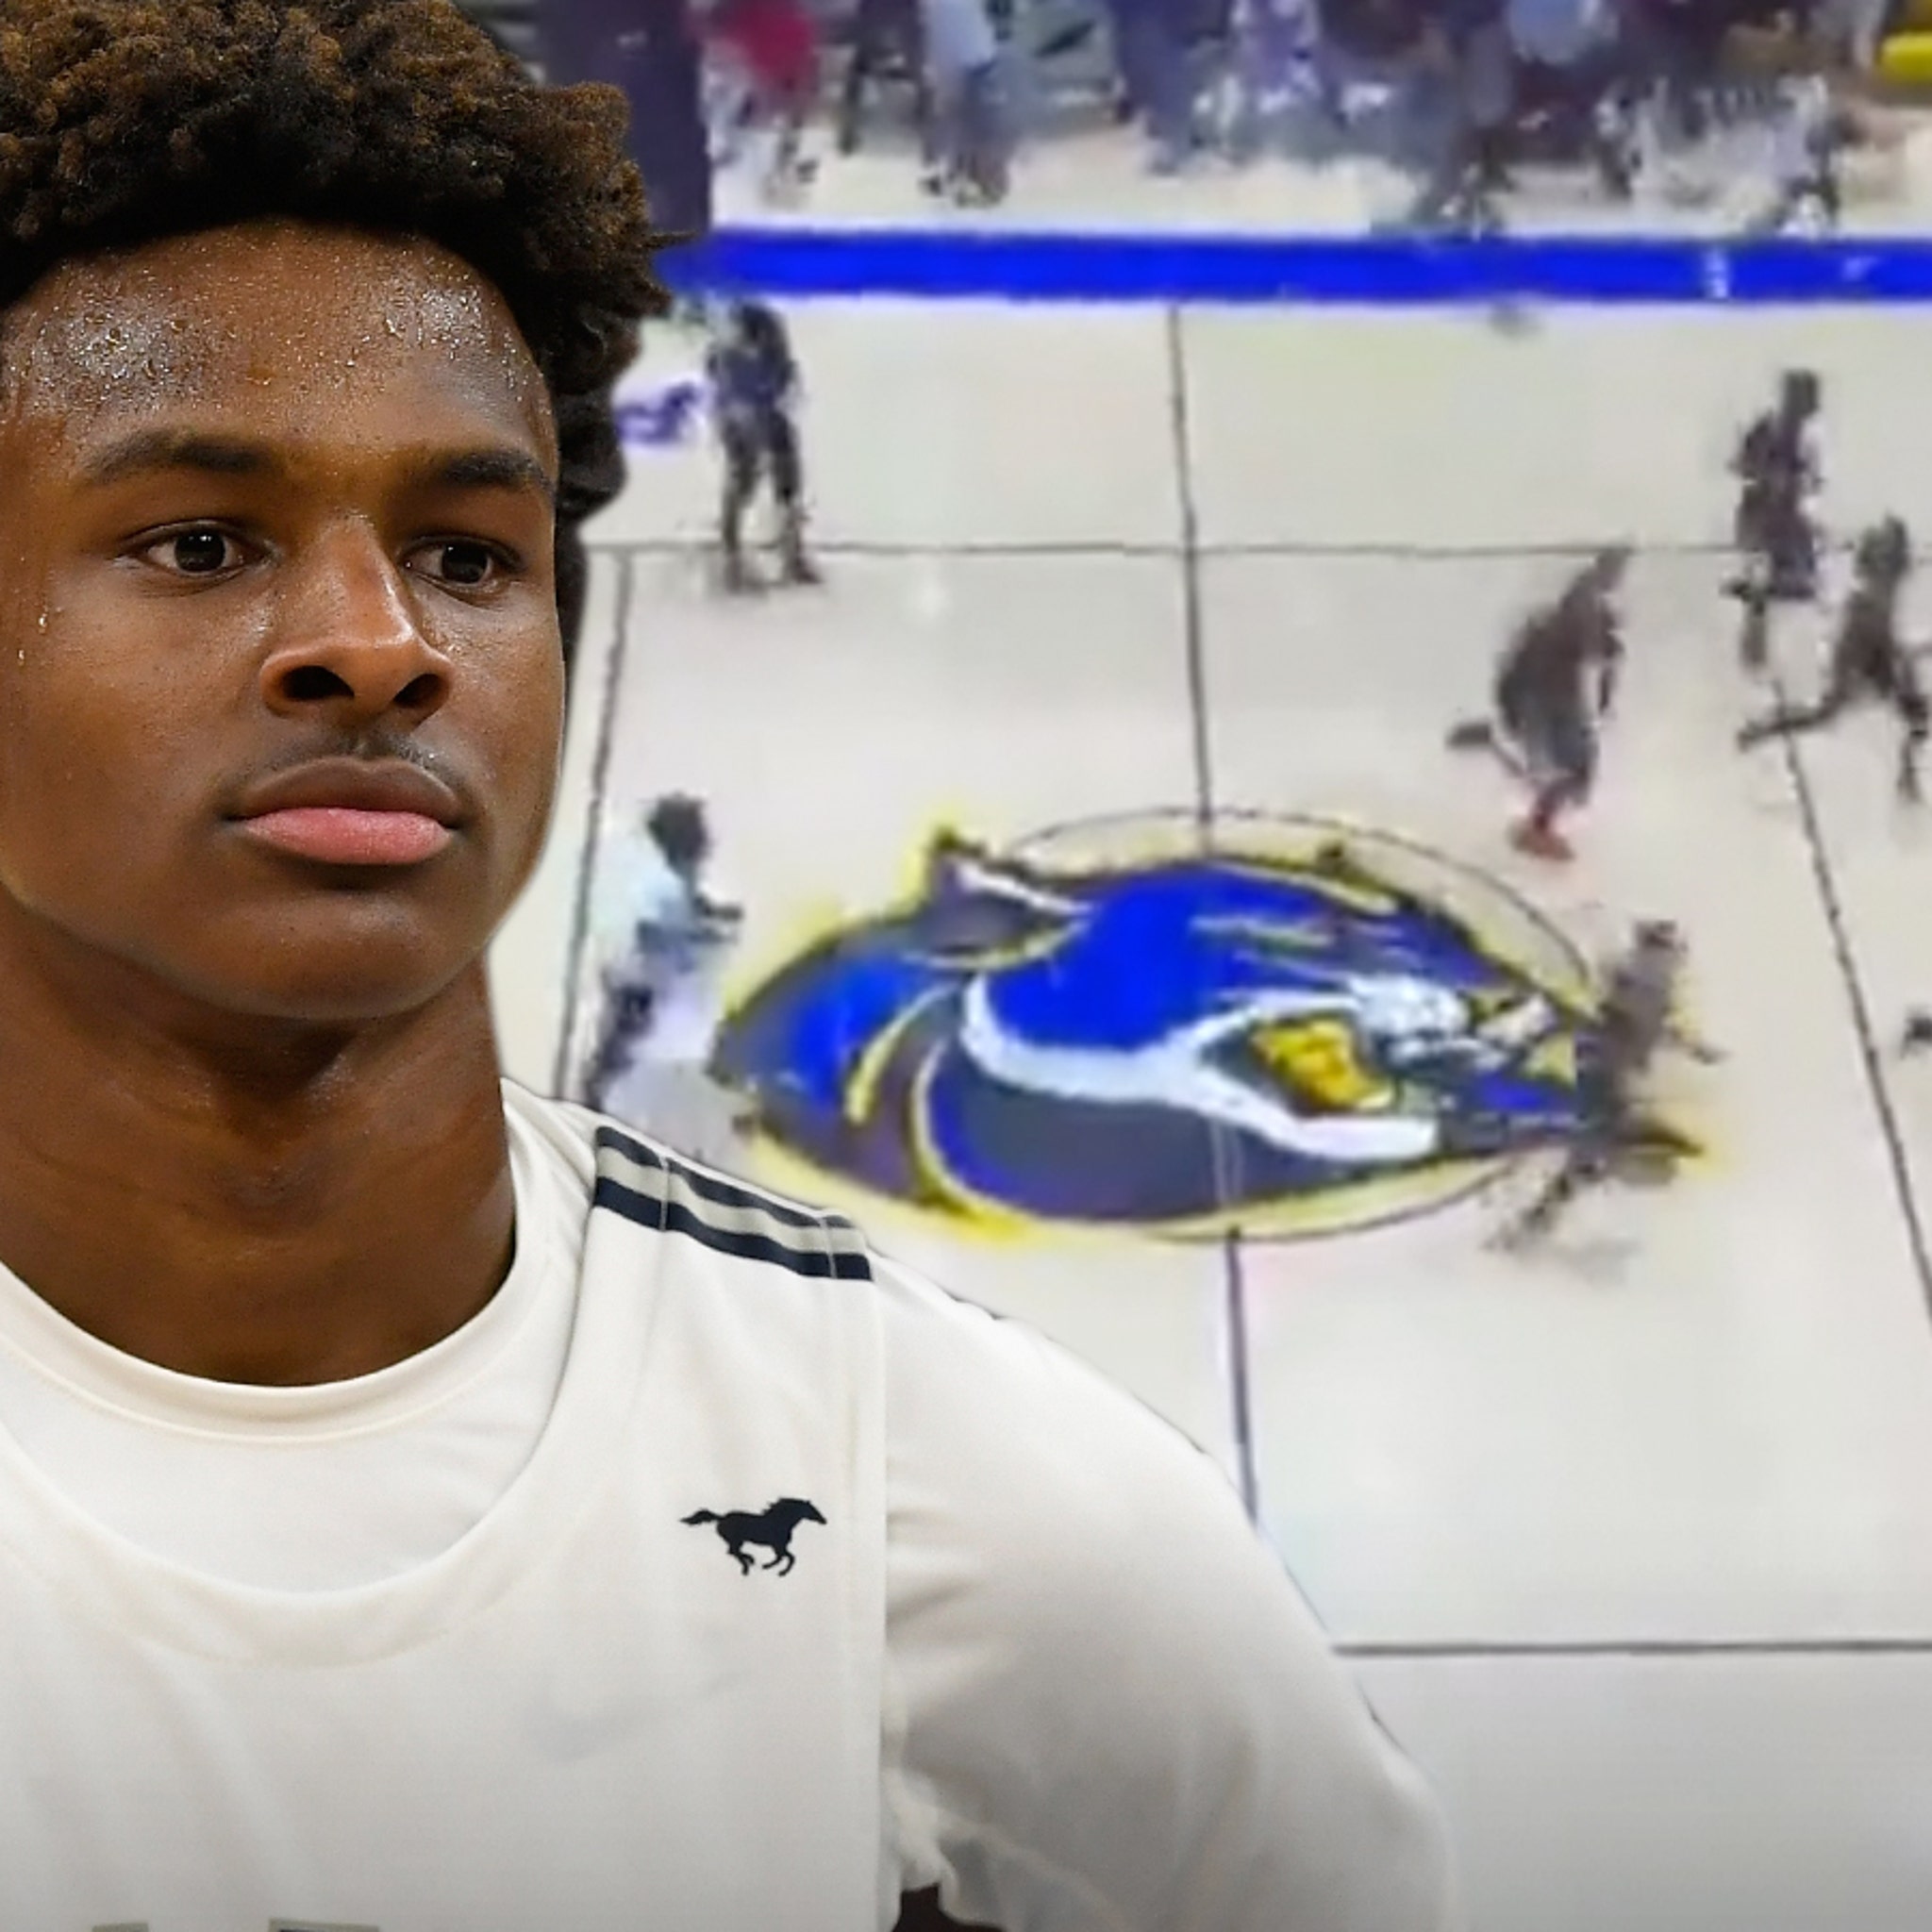 Bronny James, Sierra Canyon rushed off court during game due to gun scare 